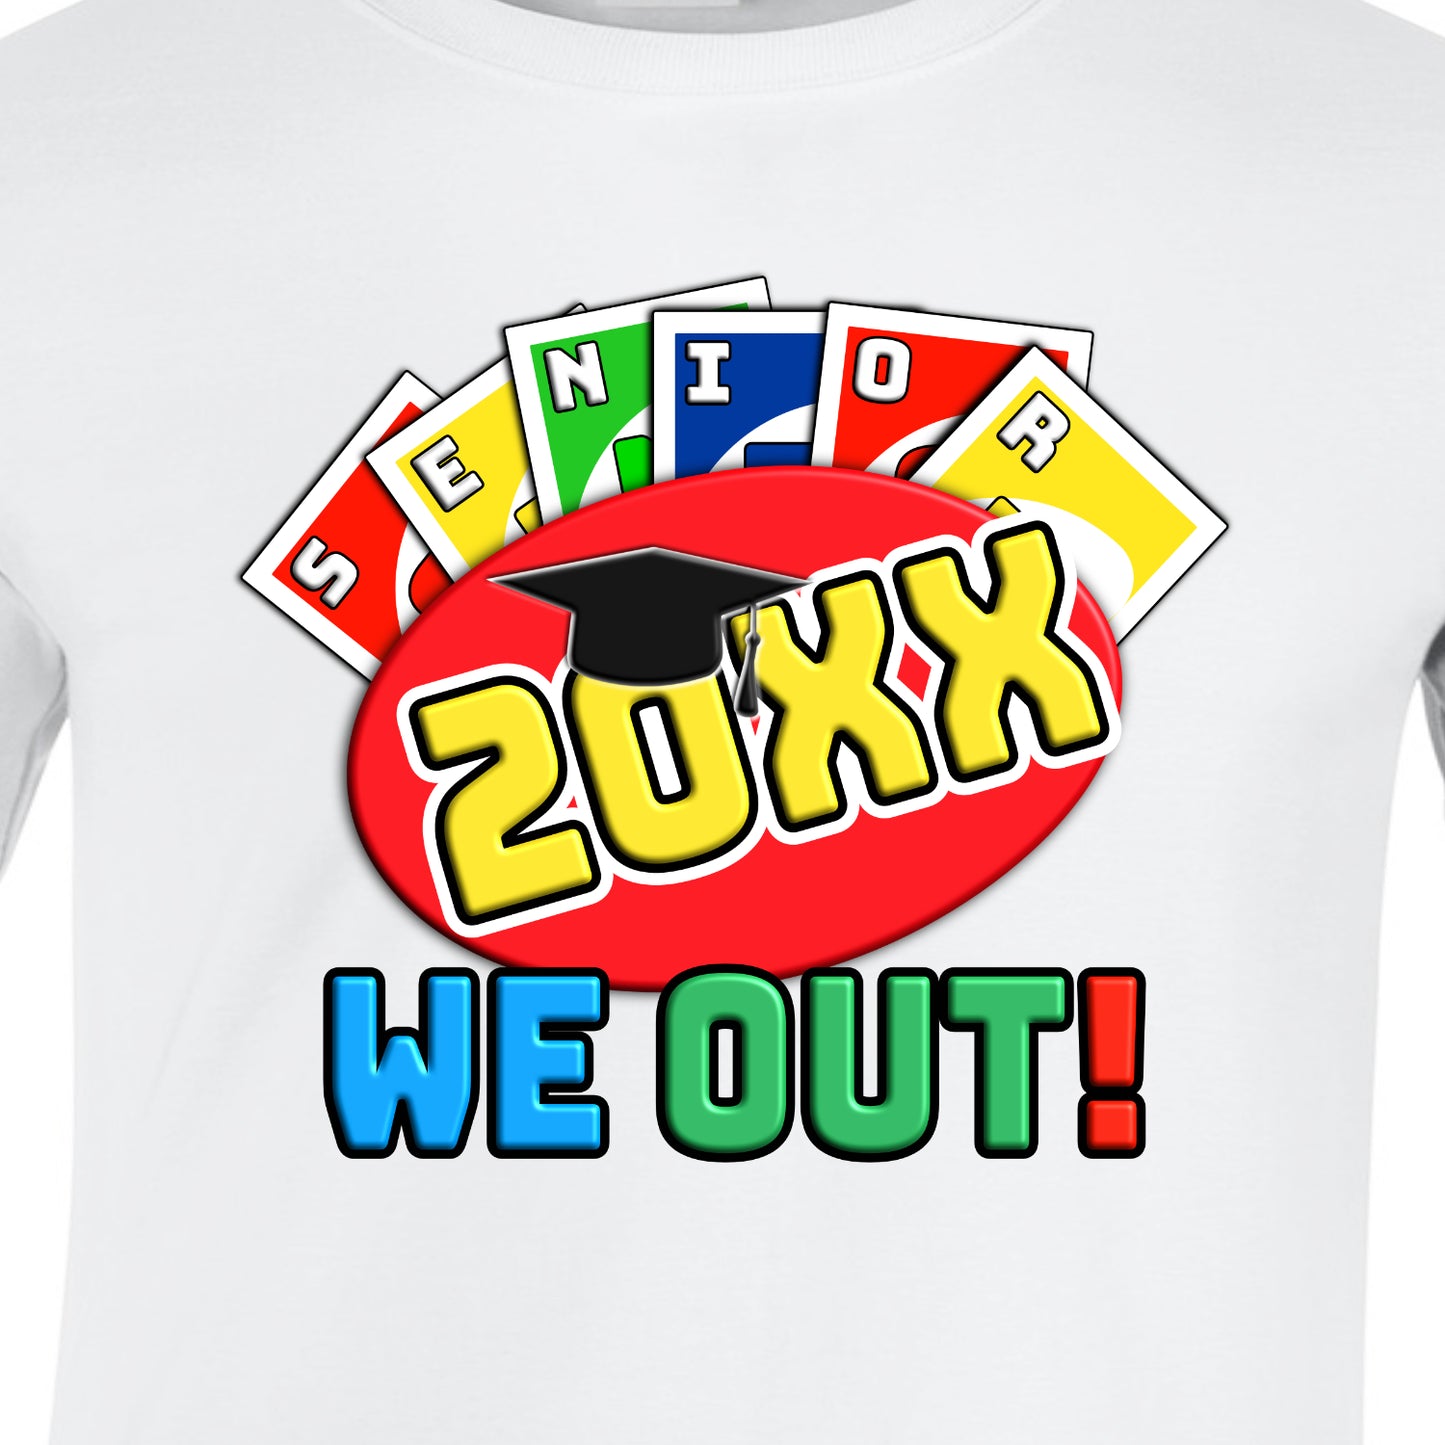 Uno-Senior Year We Out Graduate T-Shirt